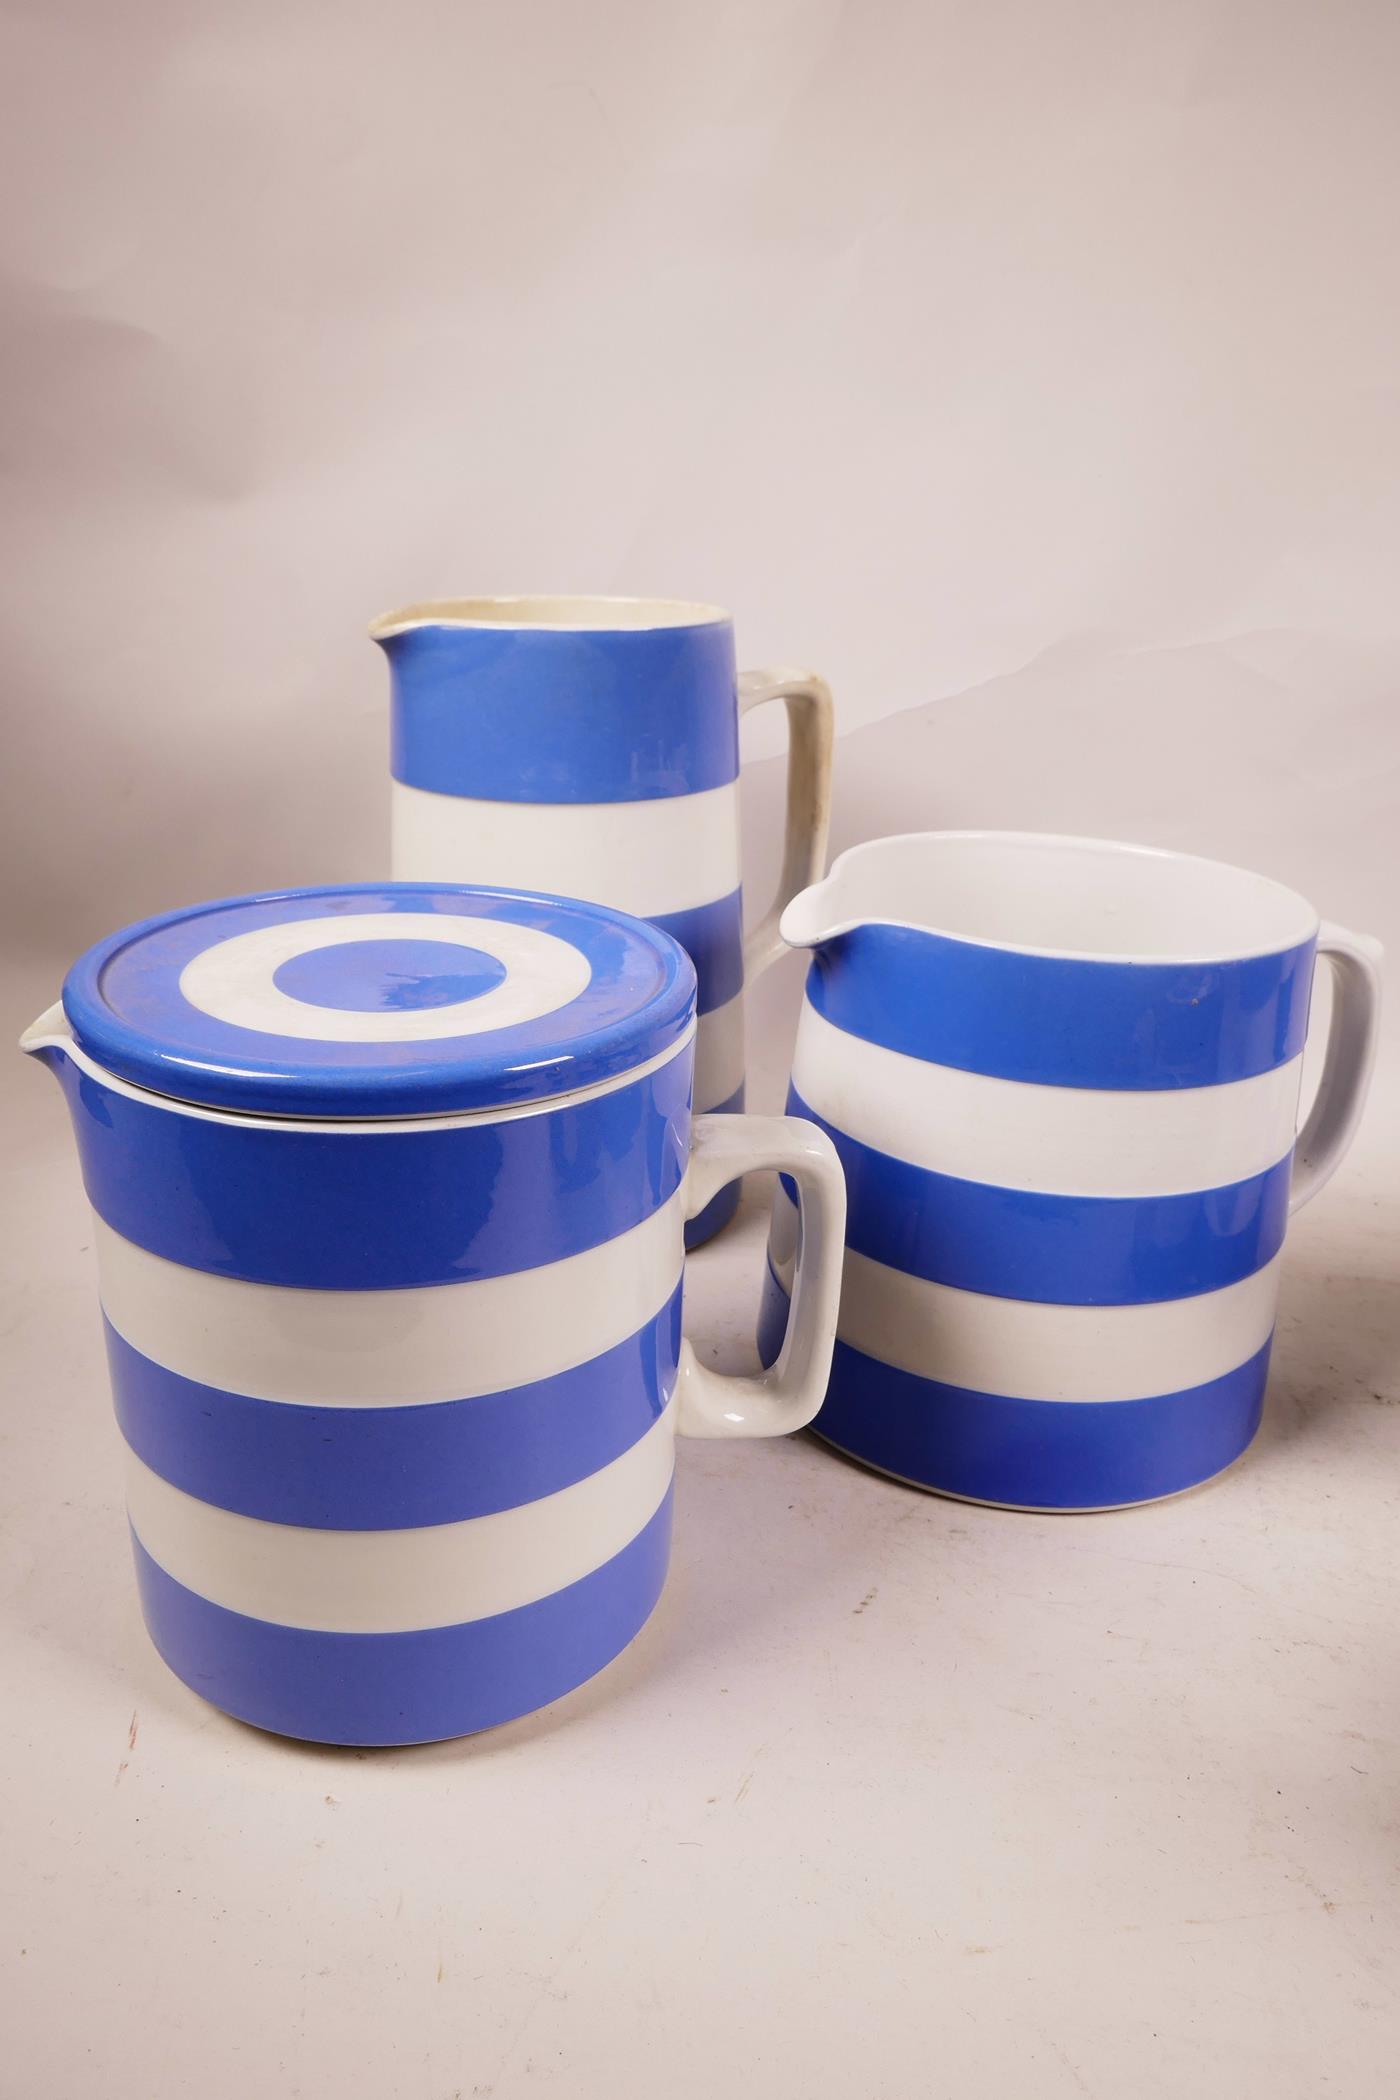 Ten large pieces of T.G. Green and Co. Cornish ware, blue and white, including three teapots, a - Image 3 of 7